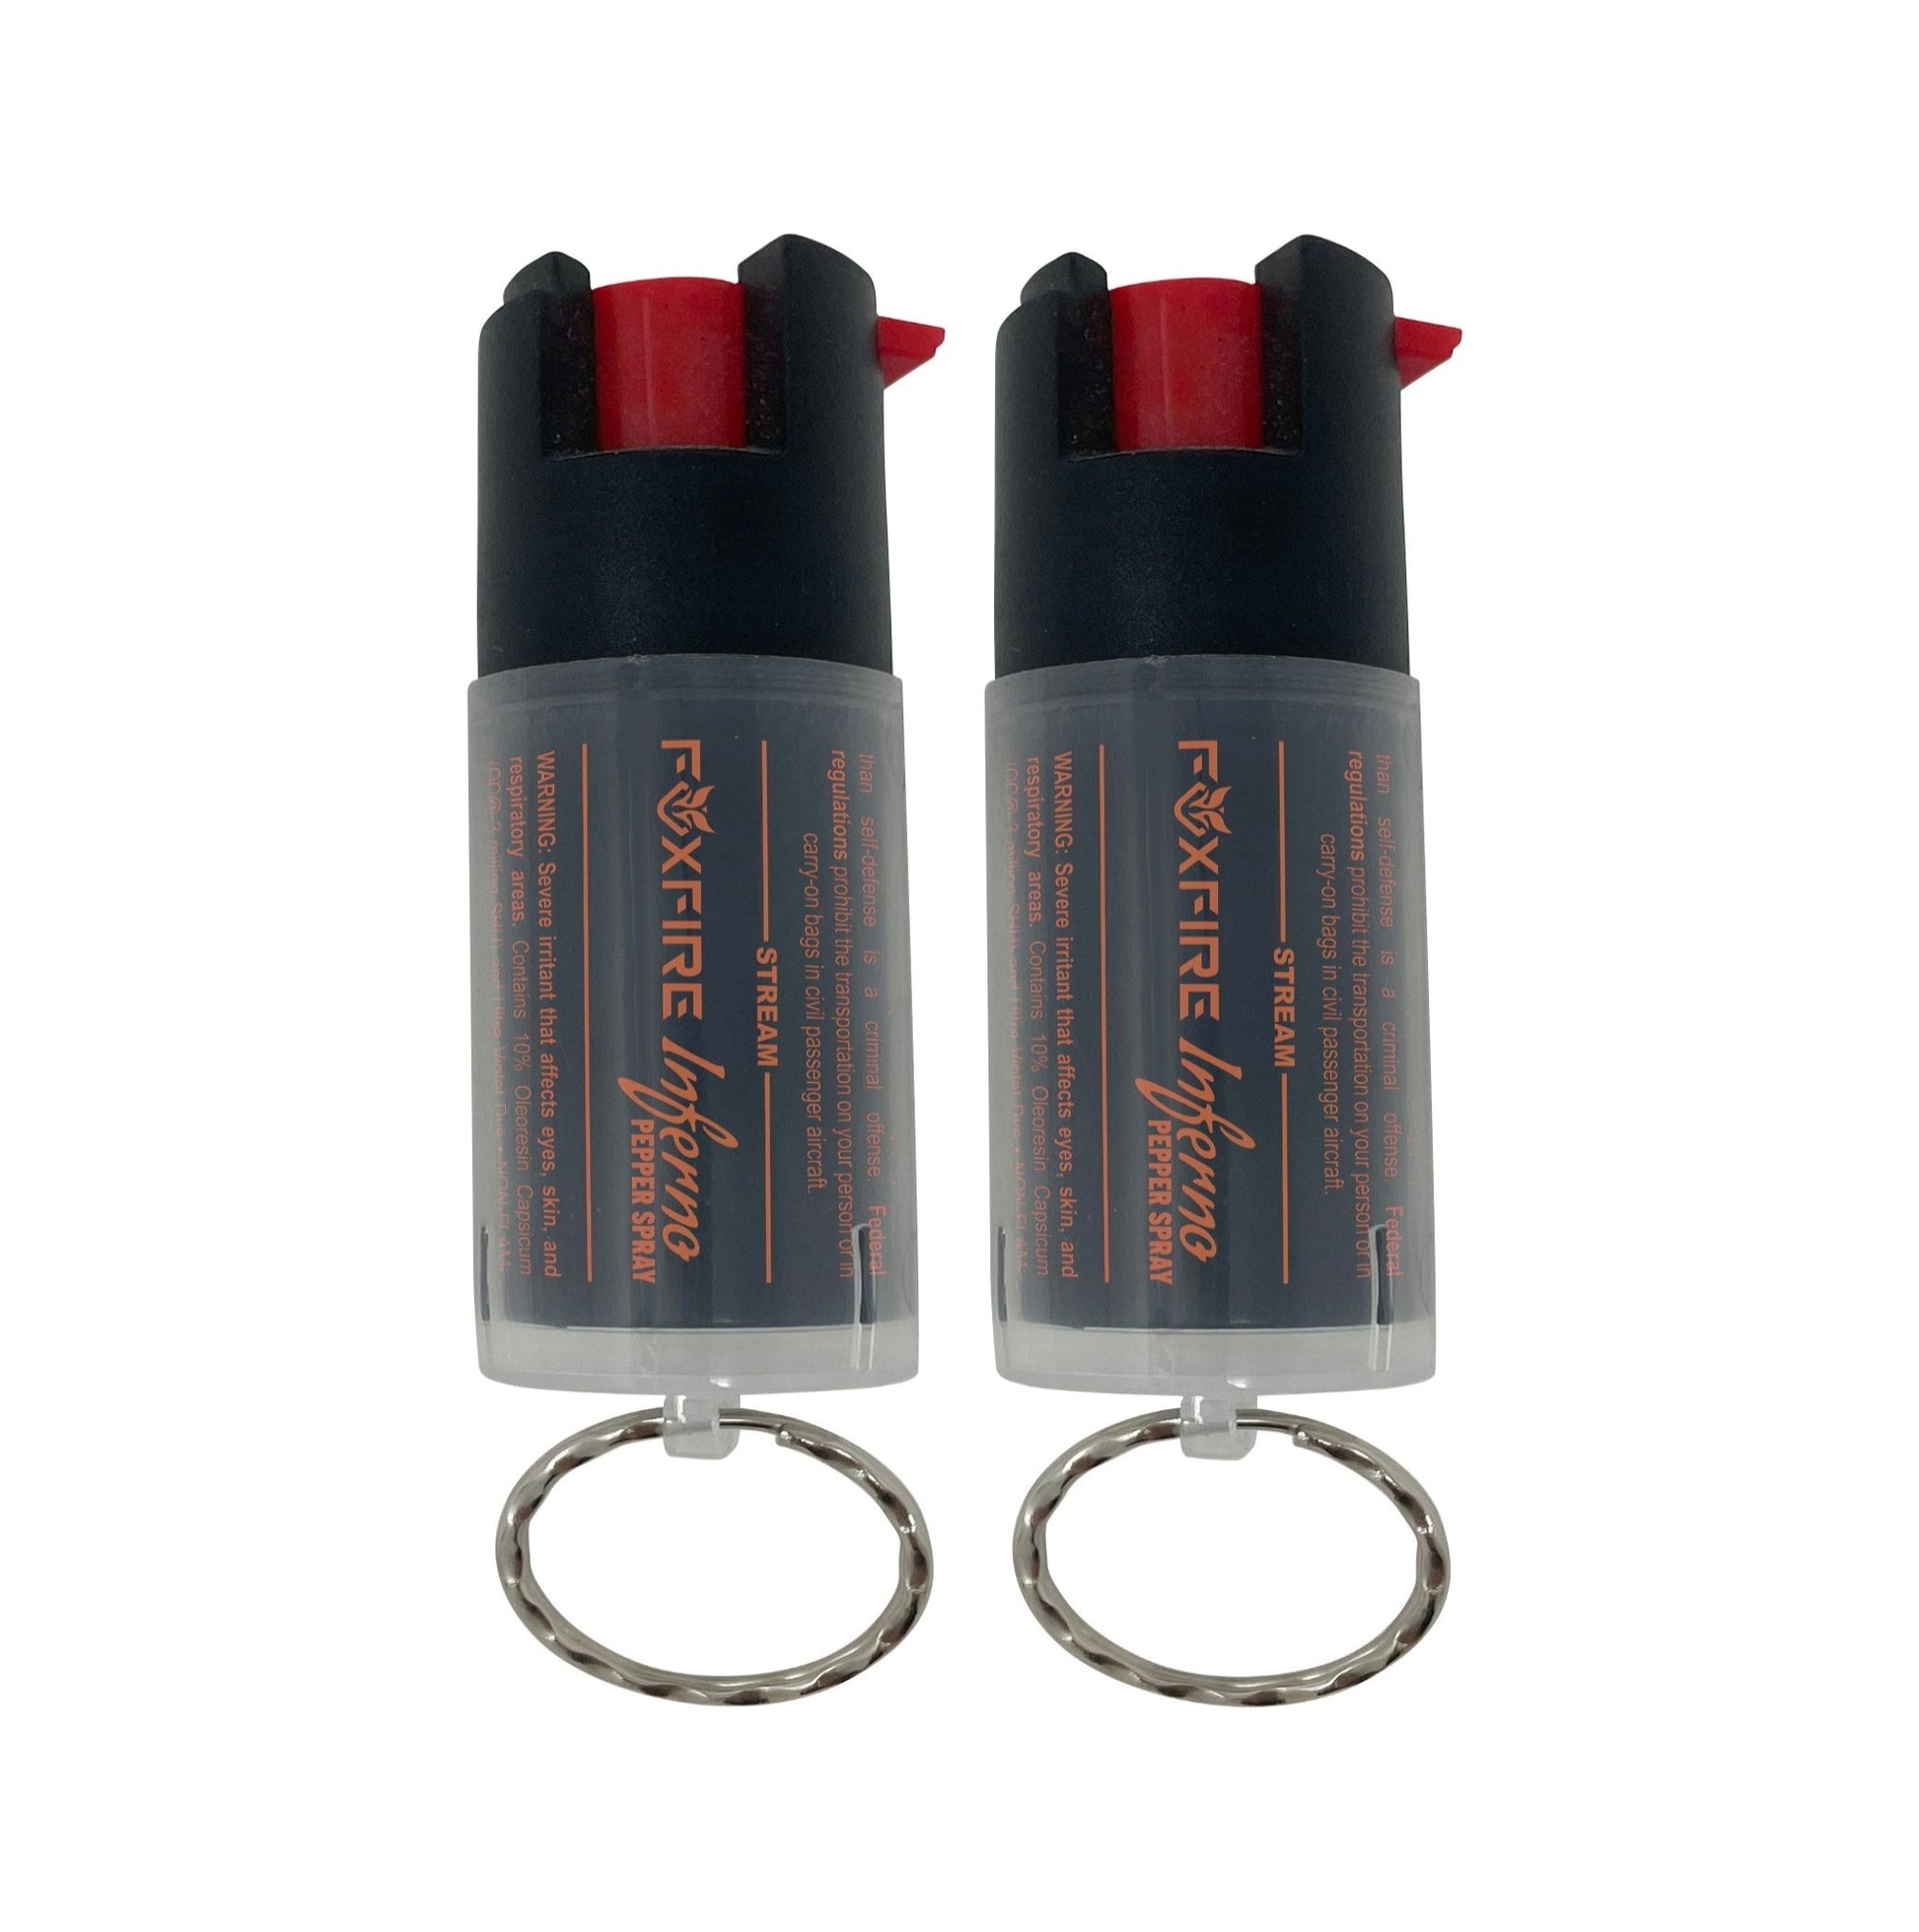 FoxFire® Inferno Pepper Spray (1/2 Ounce Twin Pack) with Key Ring